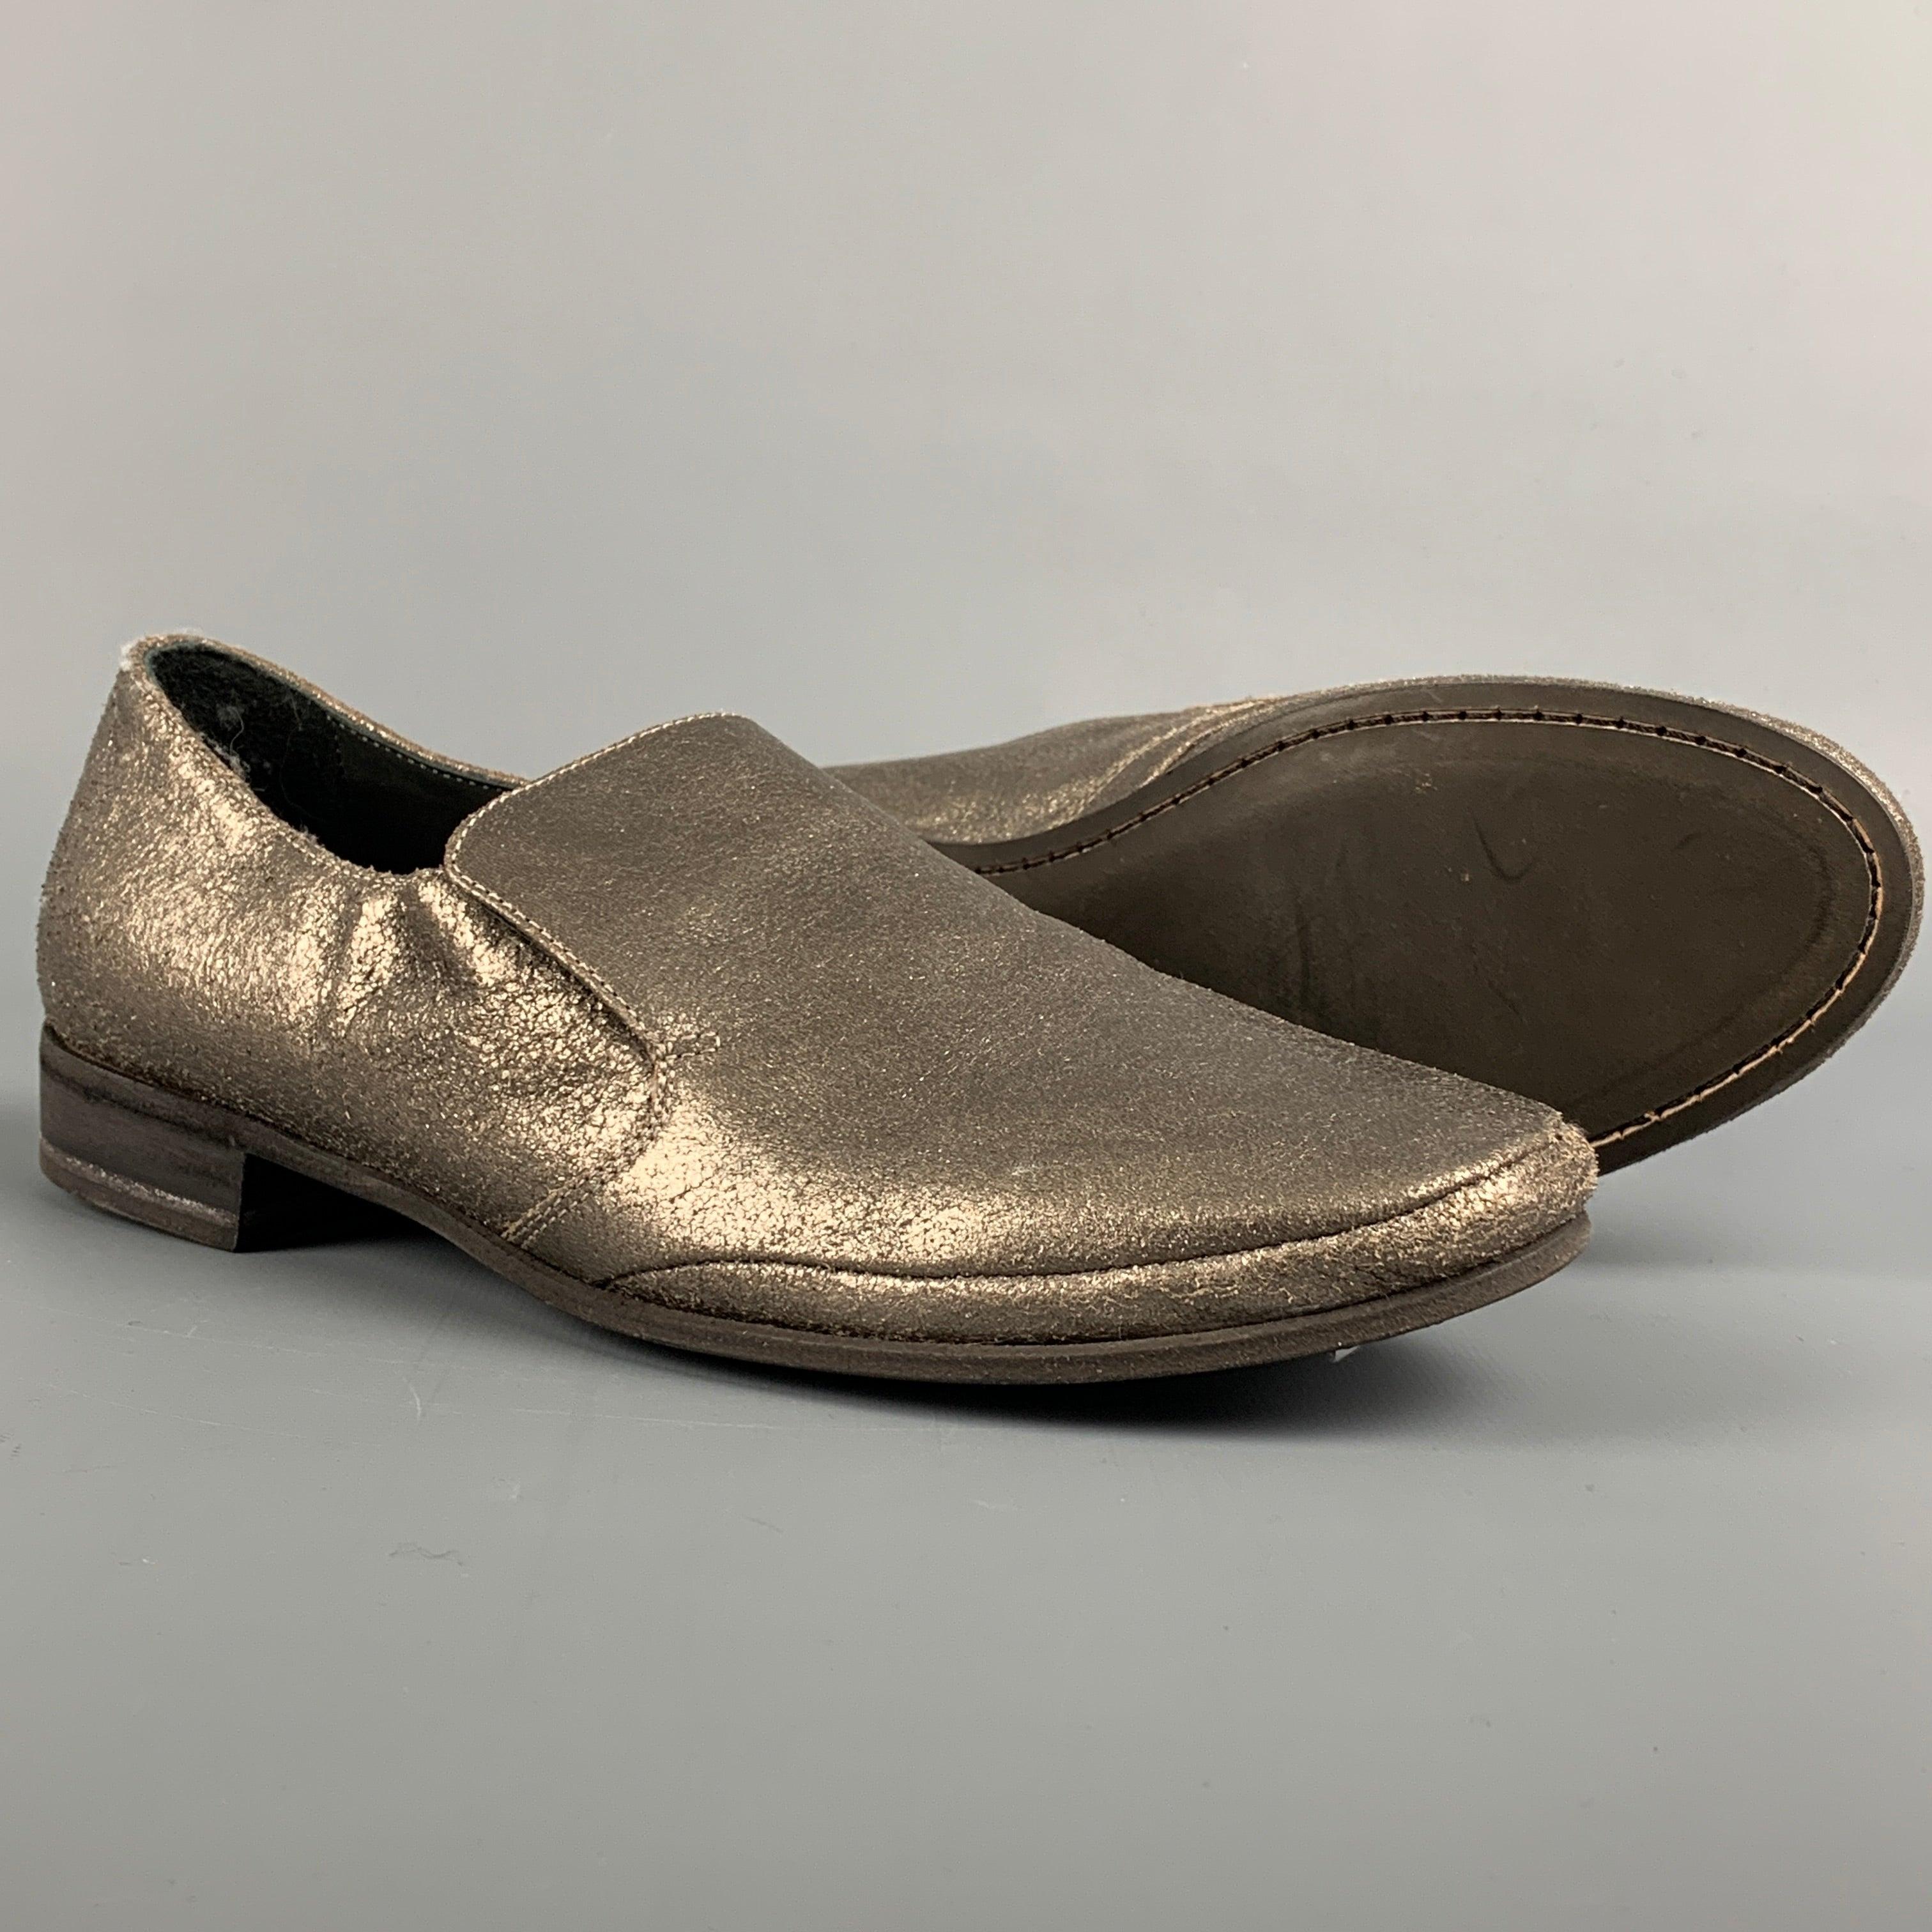 BRUNELLO CUCINELLI Size 7 Silver Leather Crackled Loafer Flats In Good Condition For Sale In San Francisco, CA